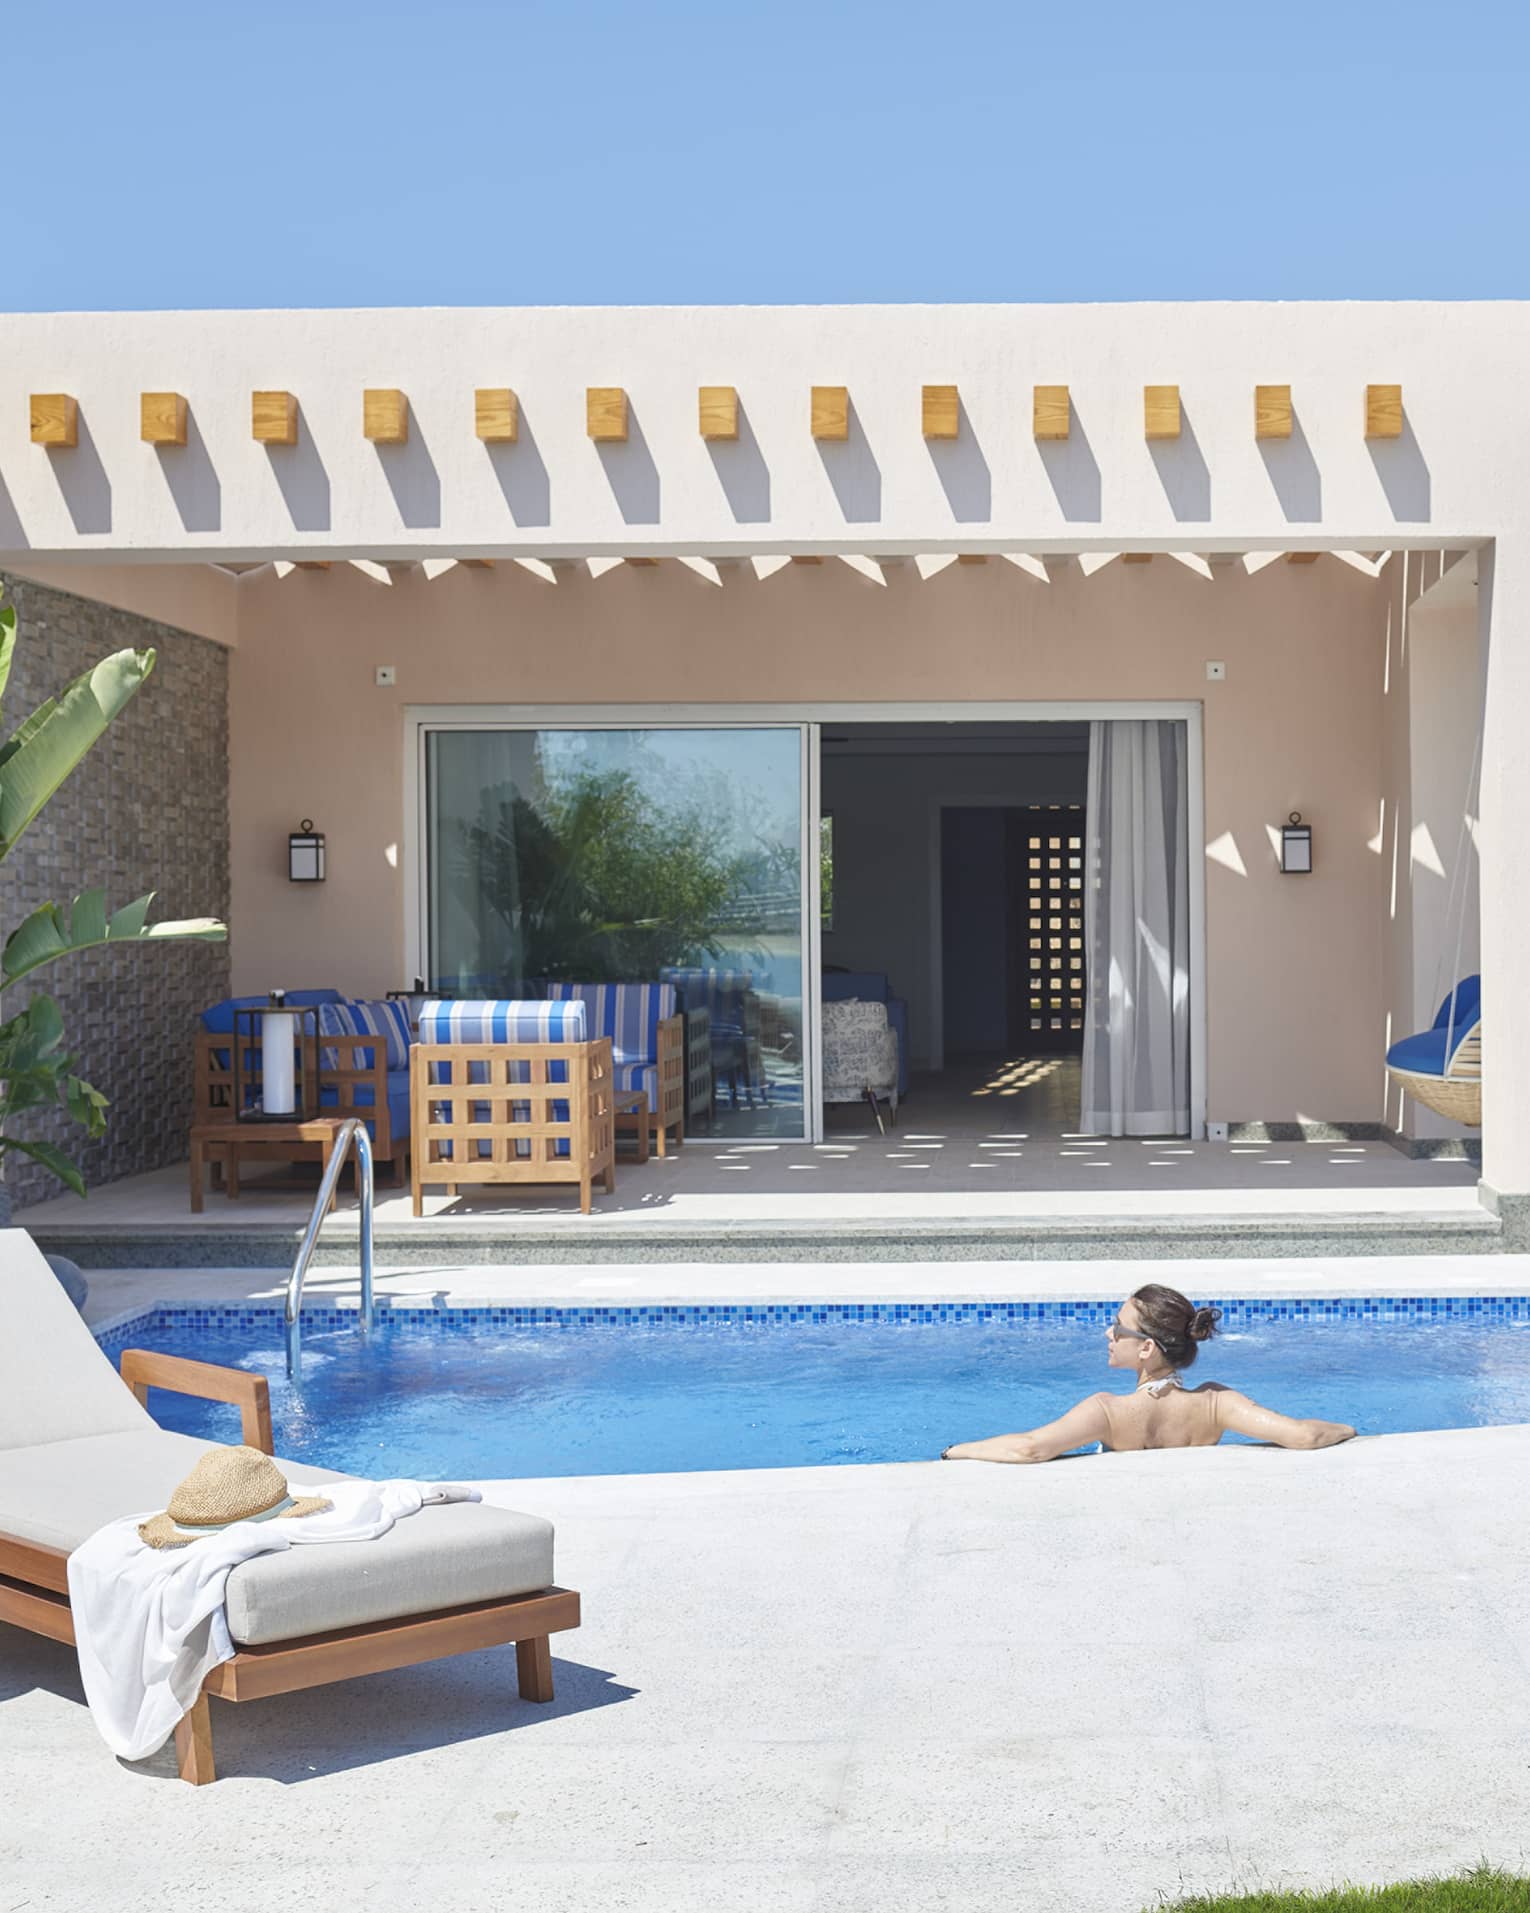 Female guest lounges in private pool at her beach villa, blue skies overhead